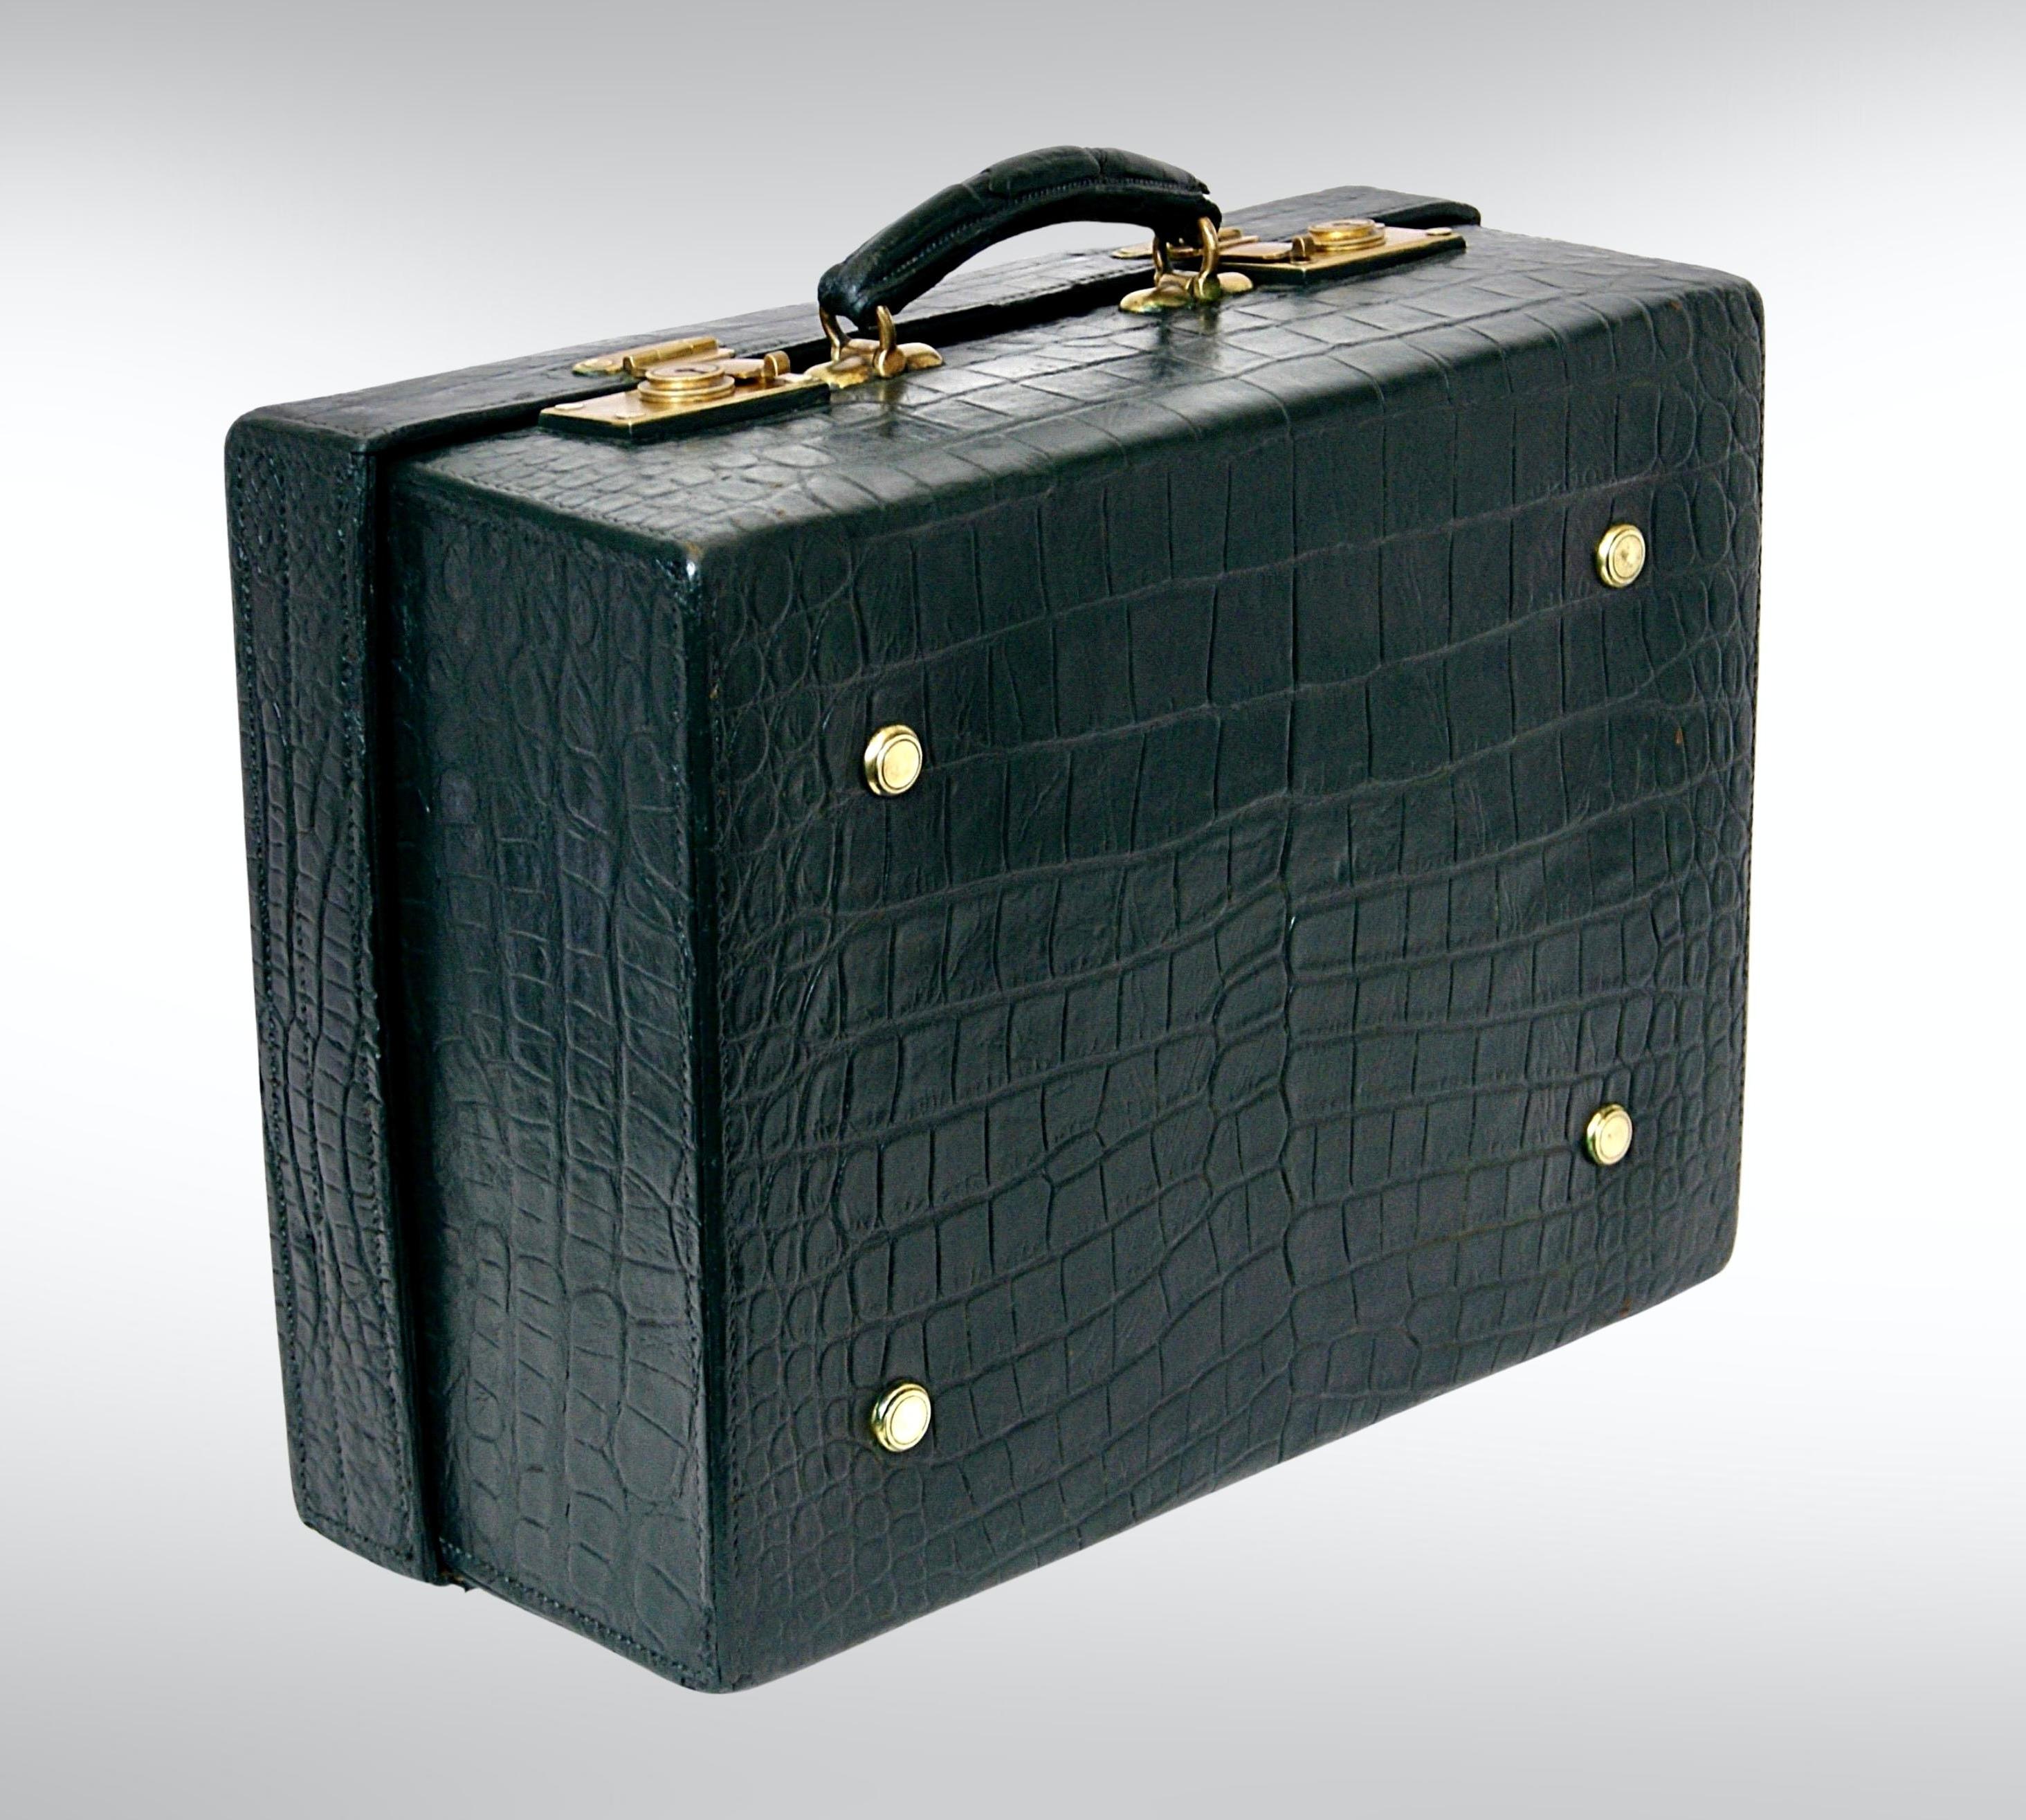 A late Victorian fine crocodile skin travel luggage by Drew & Sons London, circa 1890s.
In dark green colour with brassed lock and catches.
Opening up to reveal matching green lined interior in watered silk, with side pockets for various